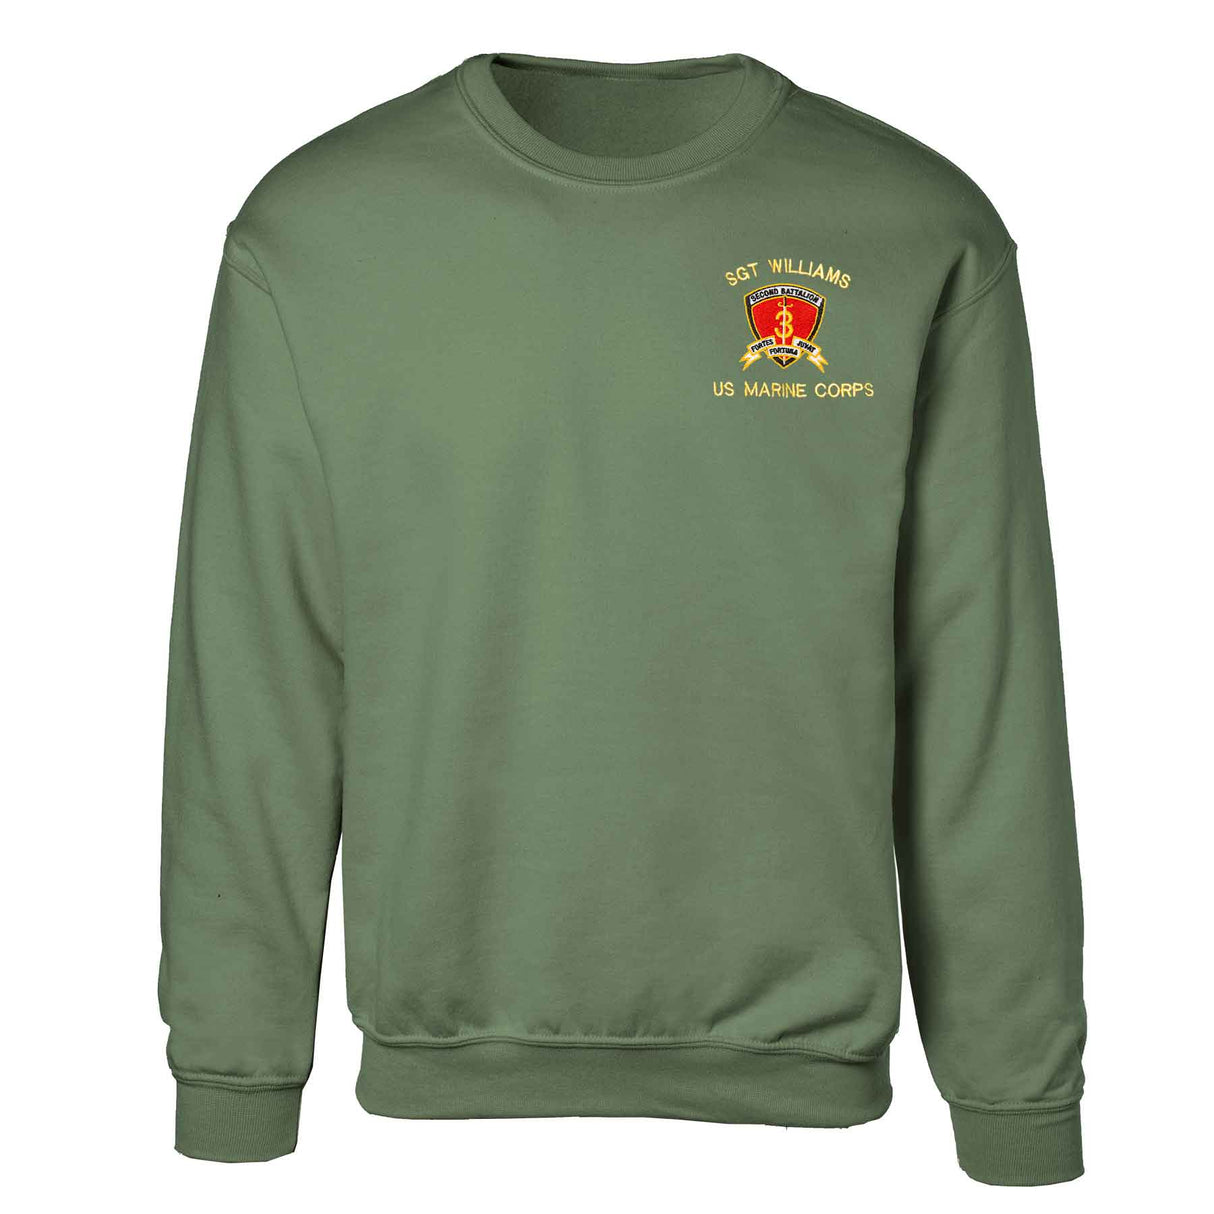 2nd Battalion 3rd Marines Embroidered Sweatshirt - SGT GRIT